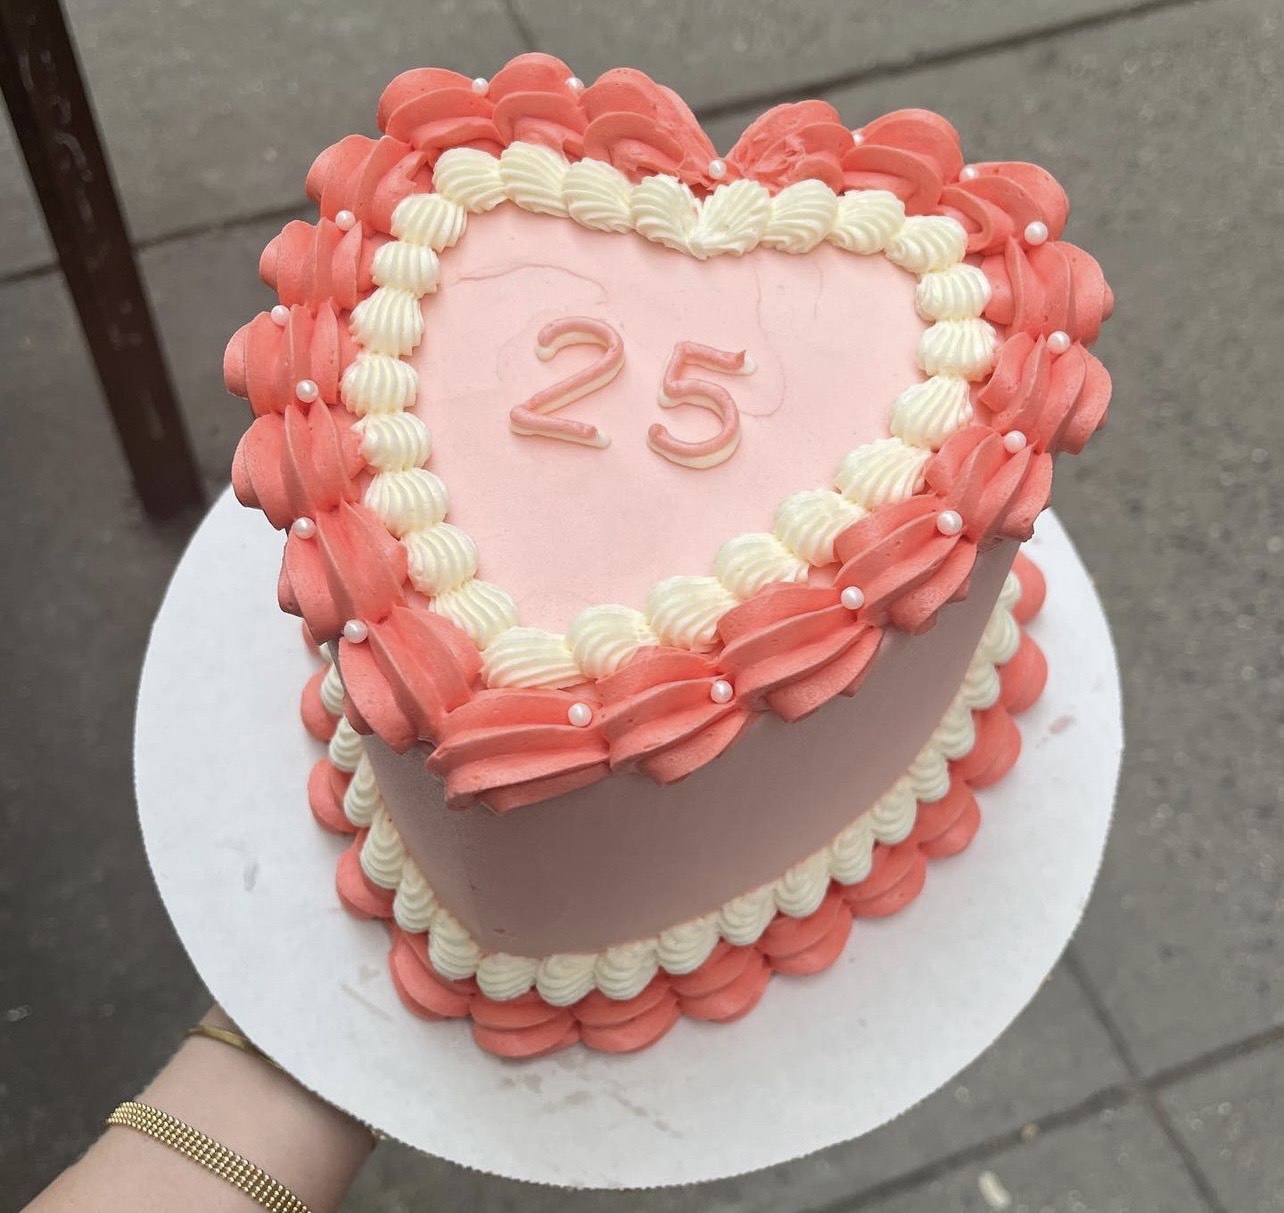 Heart Shaped Cake (without heart pan) - Out of the Box Baking-sgquangbinhtourist.com.vn